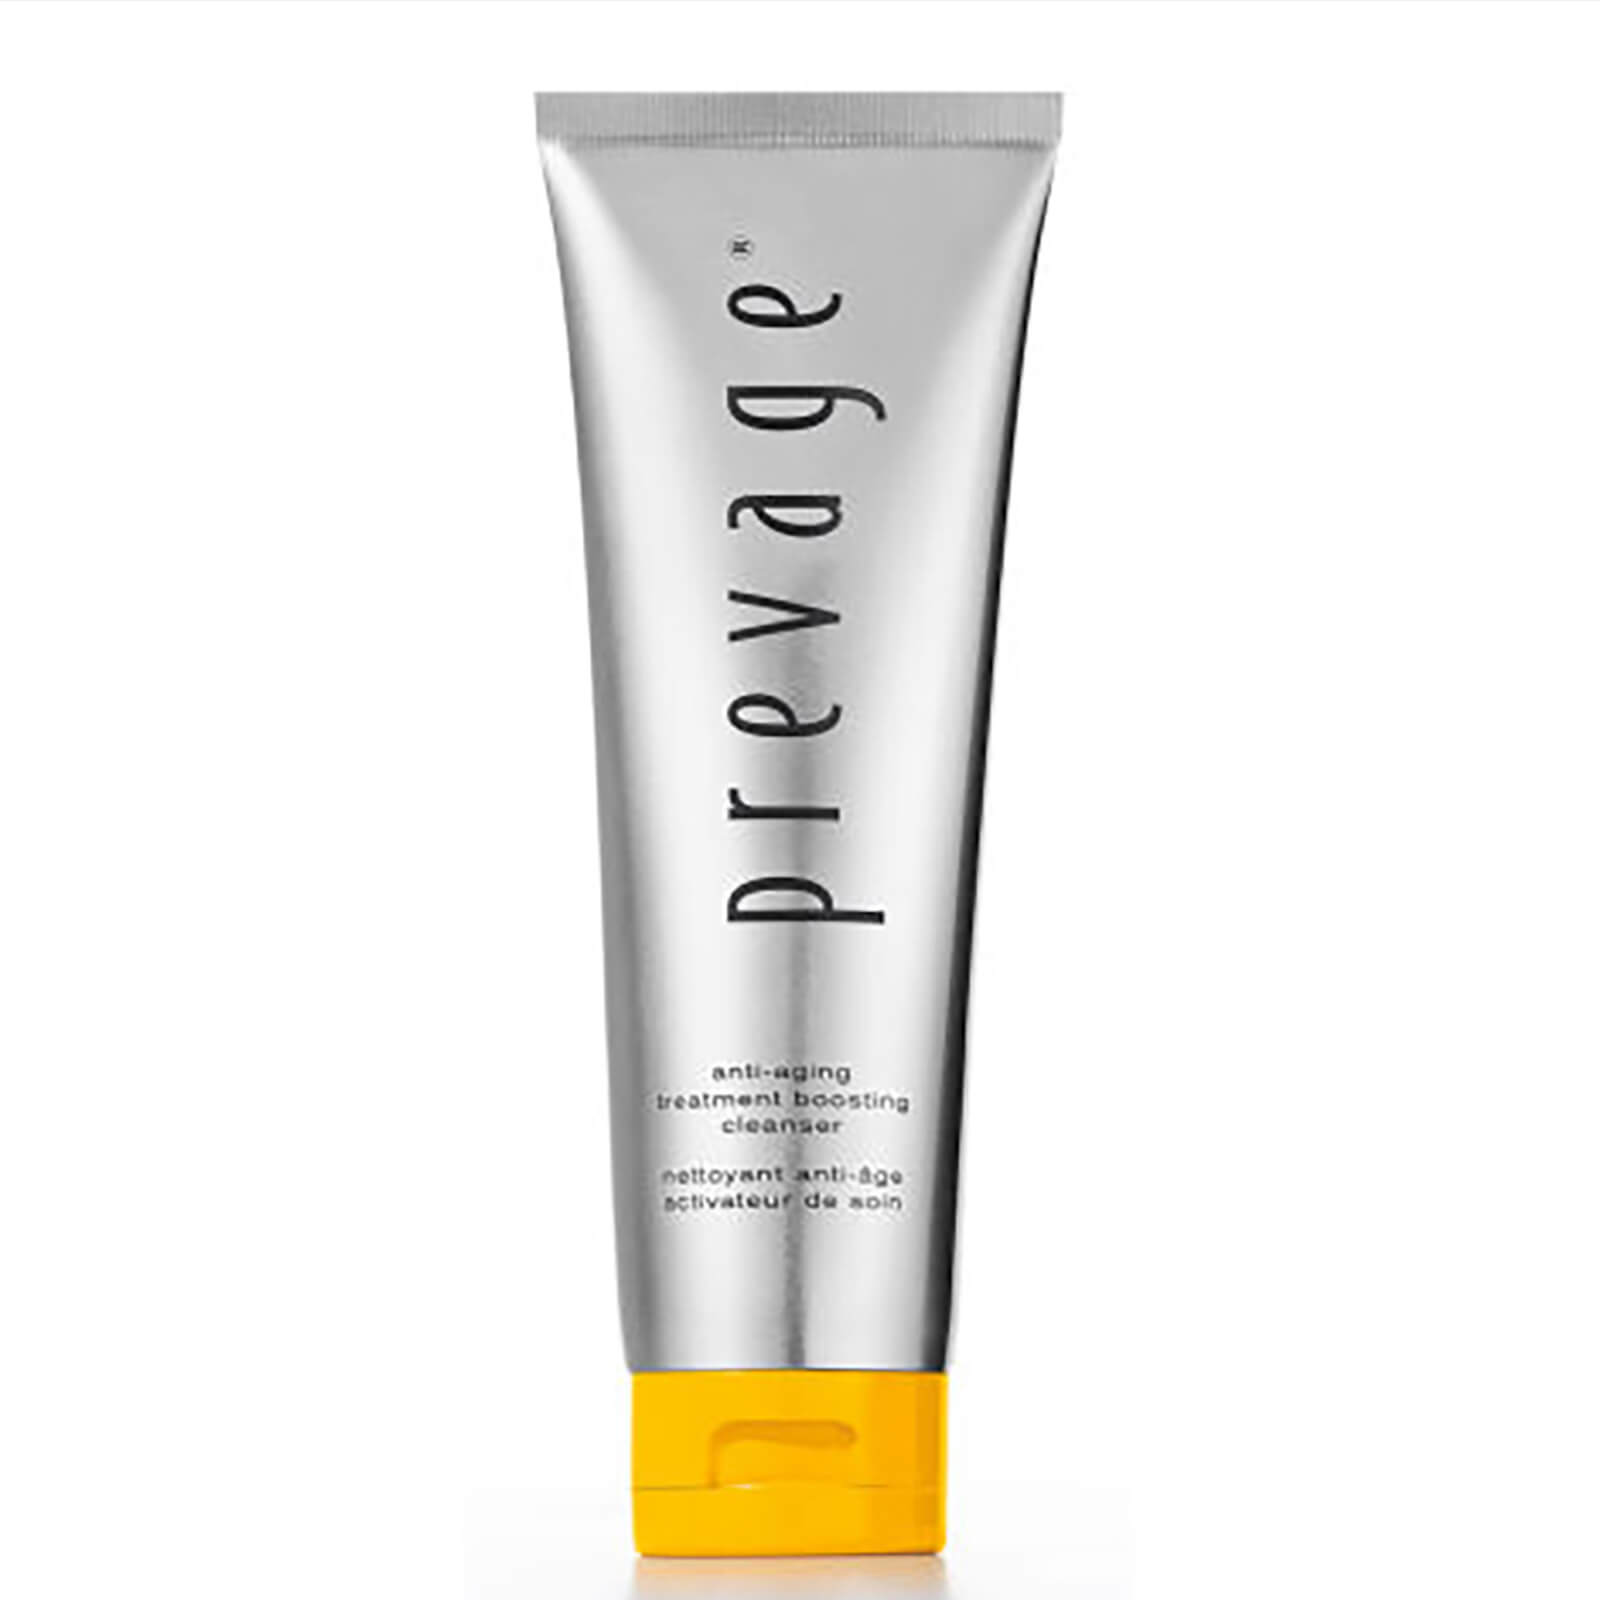 Image of Elizabeth Arden Prevage Anti-ageing Treatment Boosting Cleanser